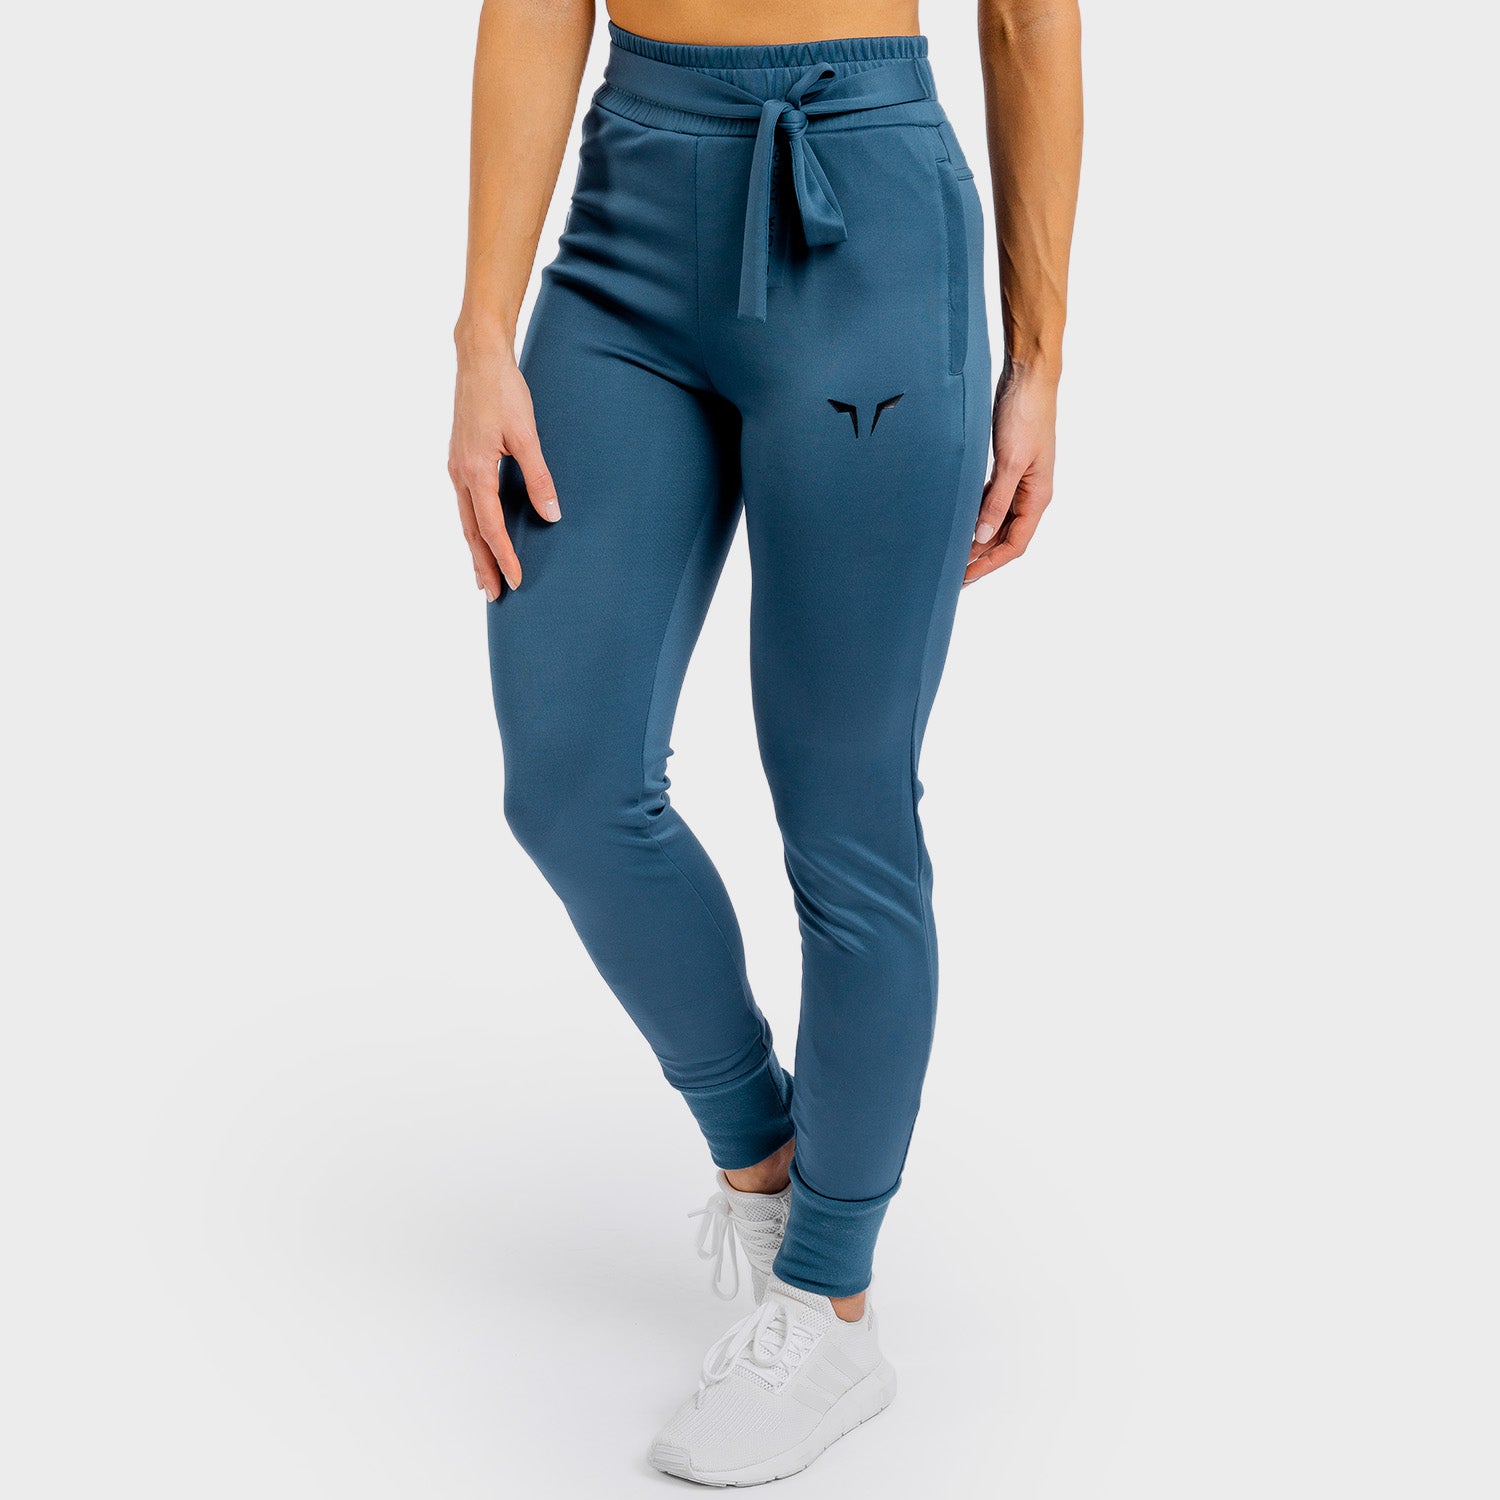 AE, She-Wolf Do-Knot-Joggers - Teal, Workout Pants Women